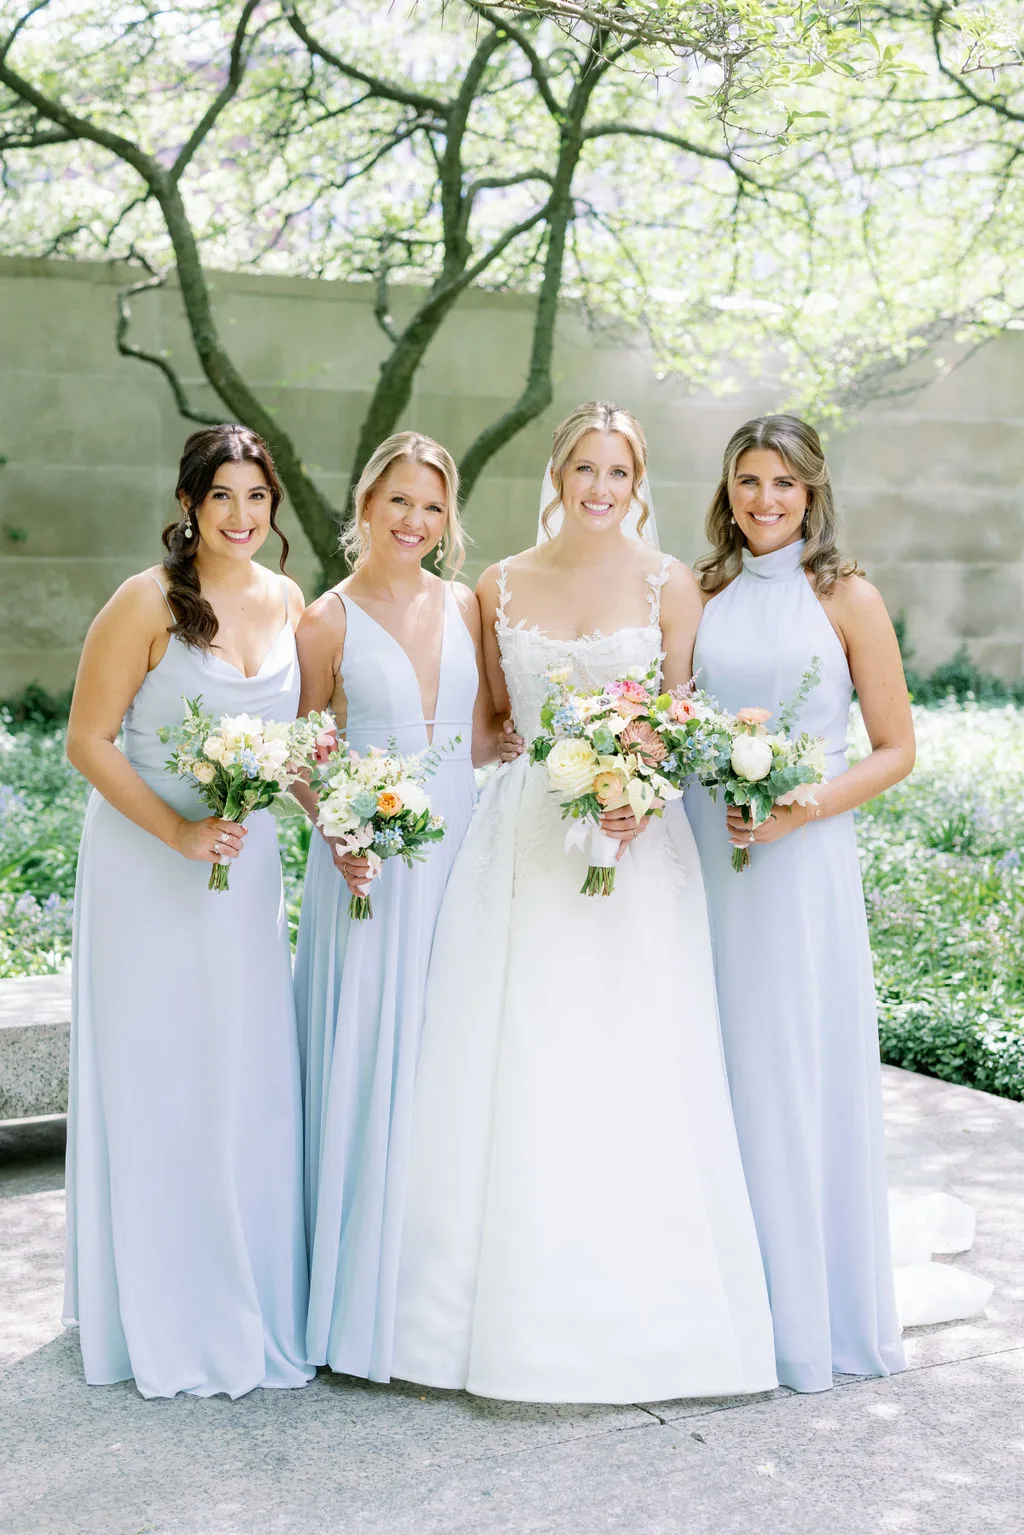 Advice for undergarments for sheer bridesmaid dress - even